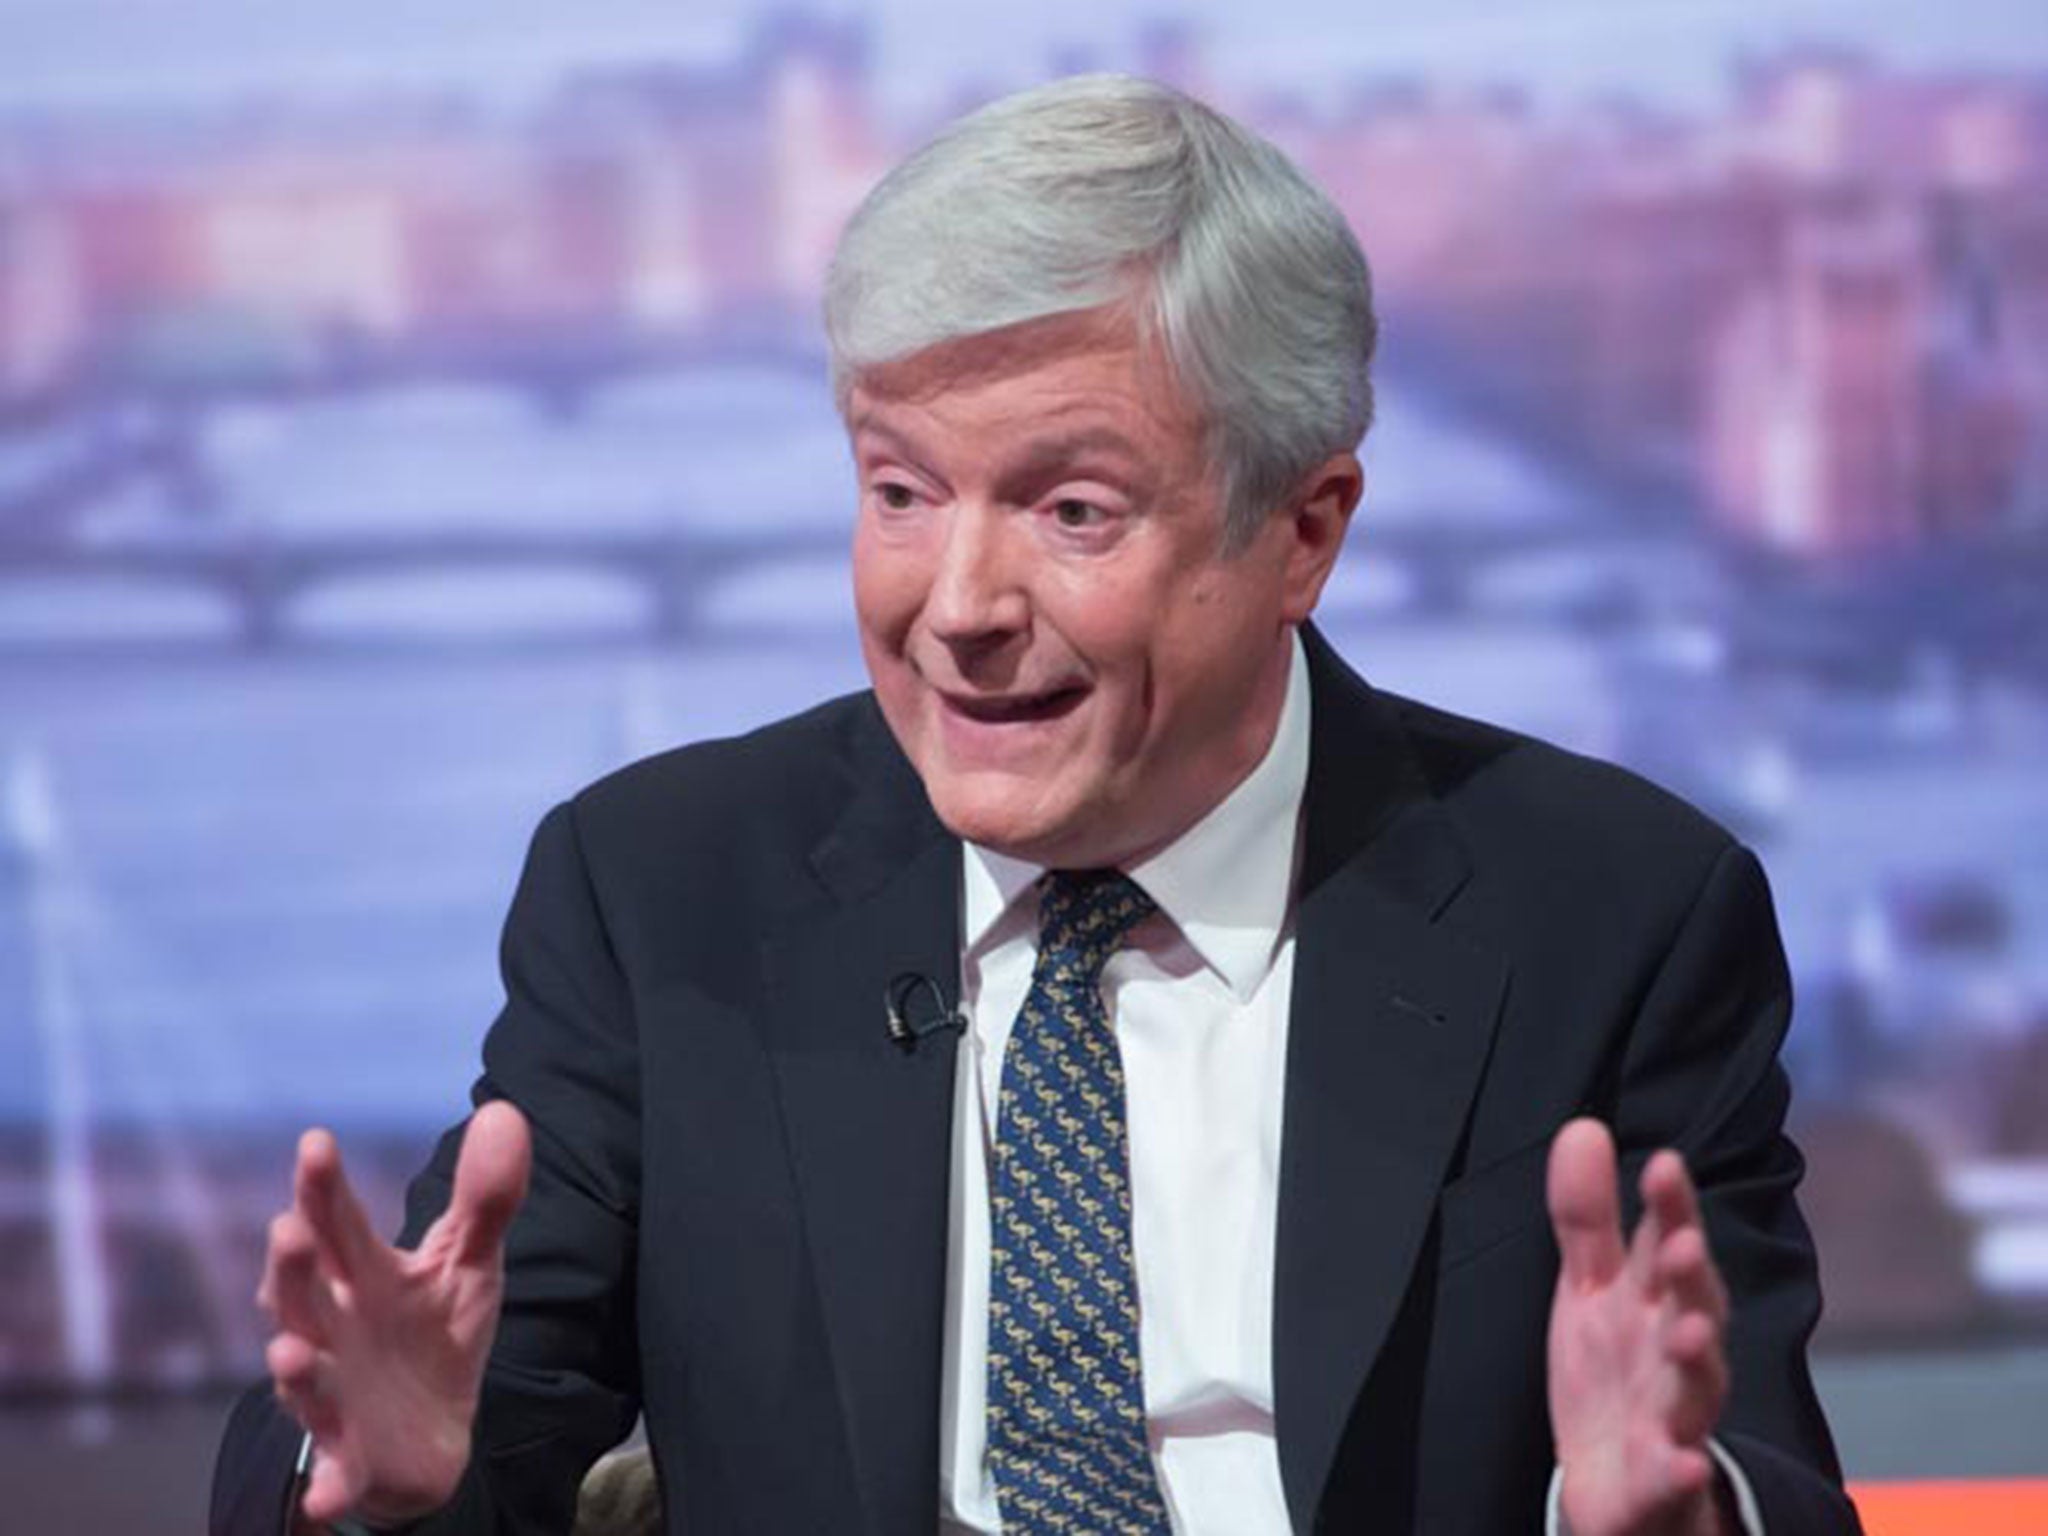 Lord Hall said he was ‘not at all happy’ with large redundancy pay-offs given to managers